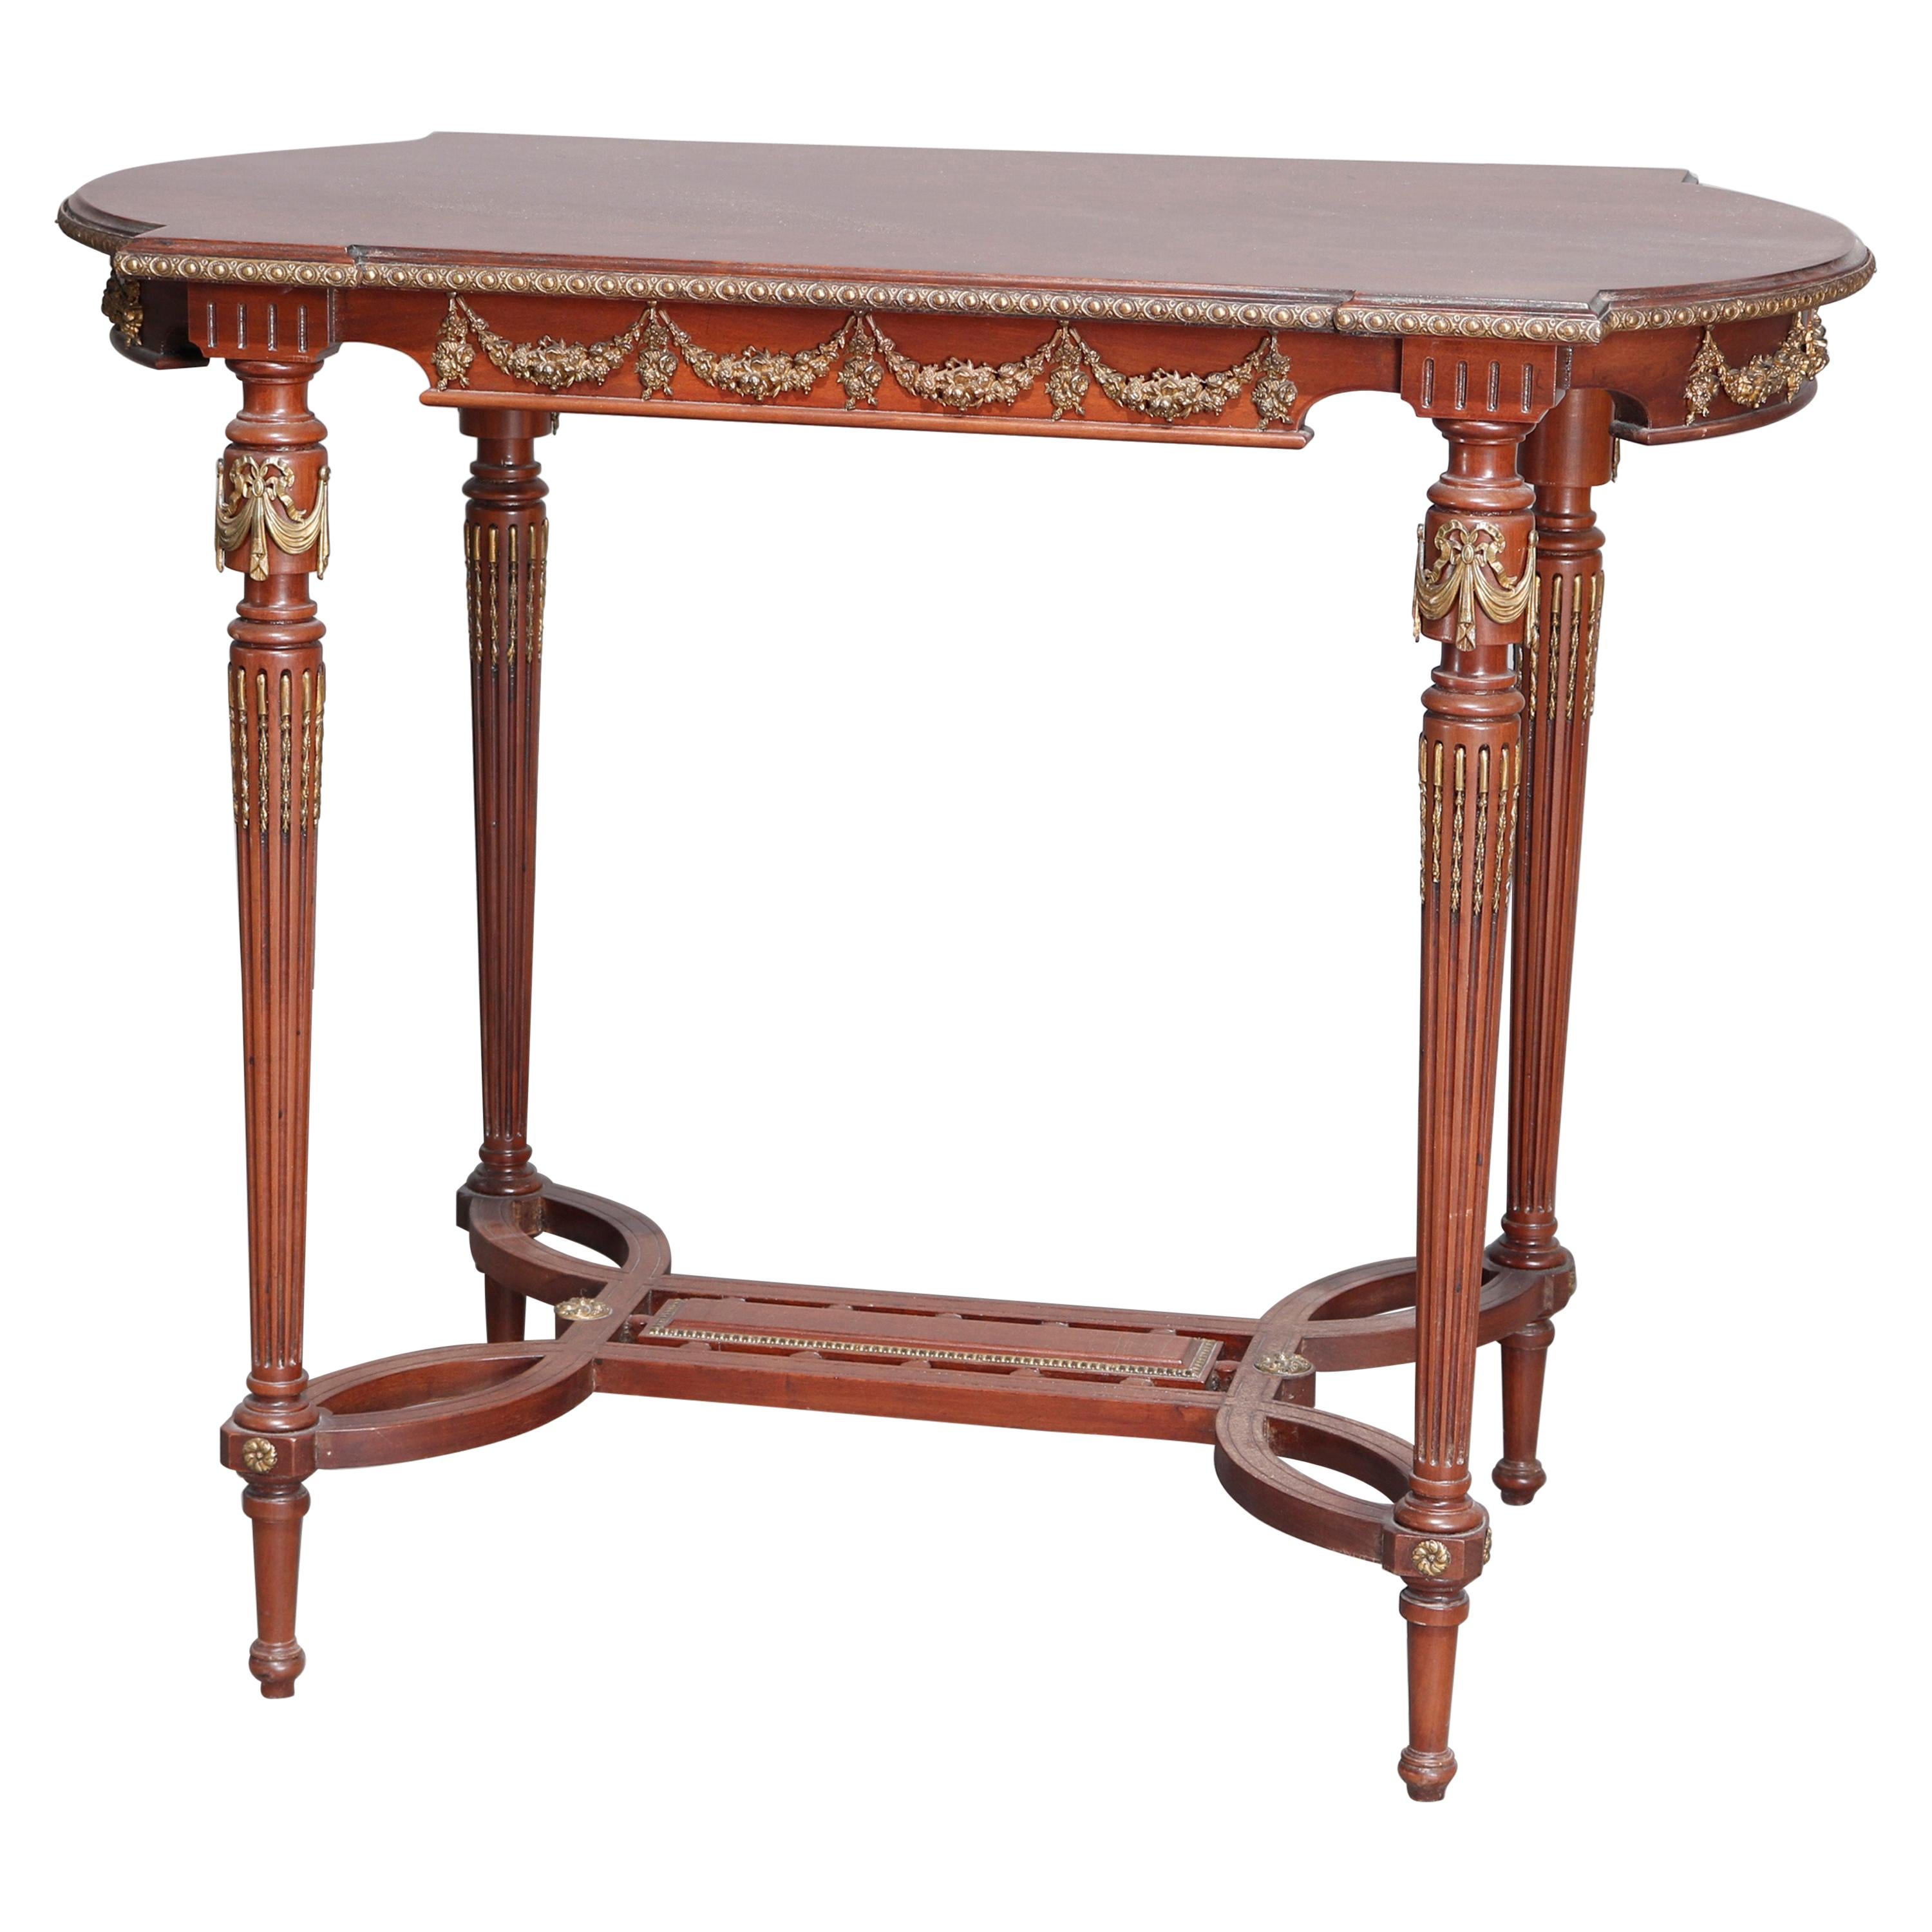 Antique French Louis XVI Mahogany Side Table with Ormolu Mounts, circa 1900